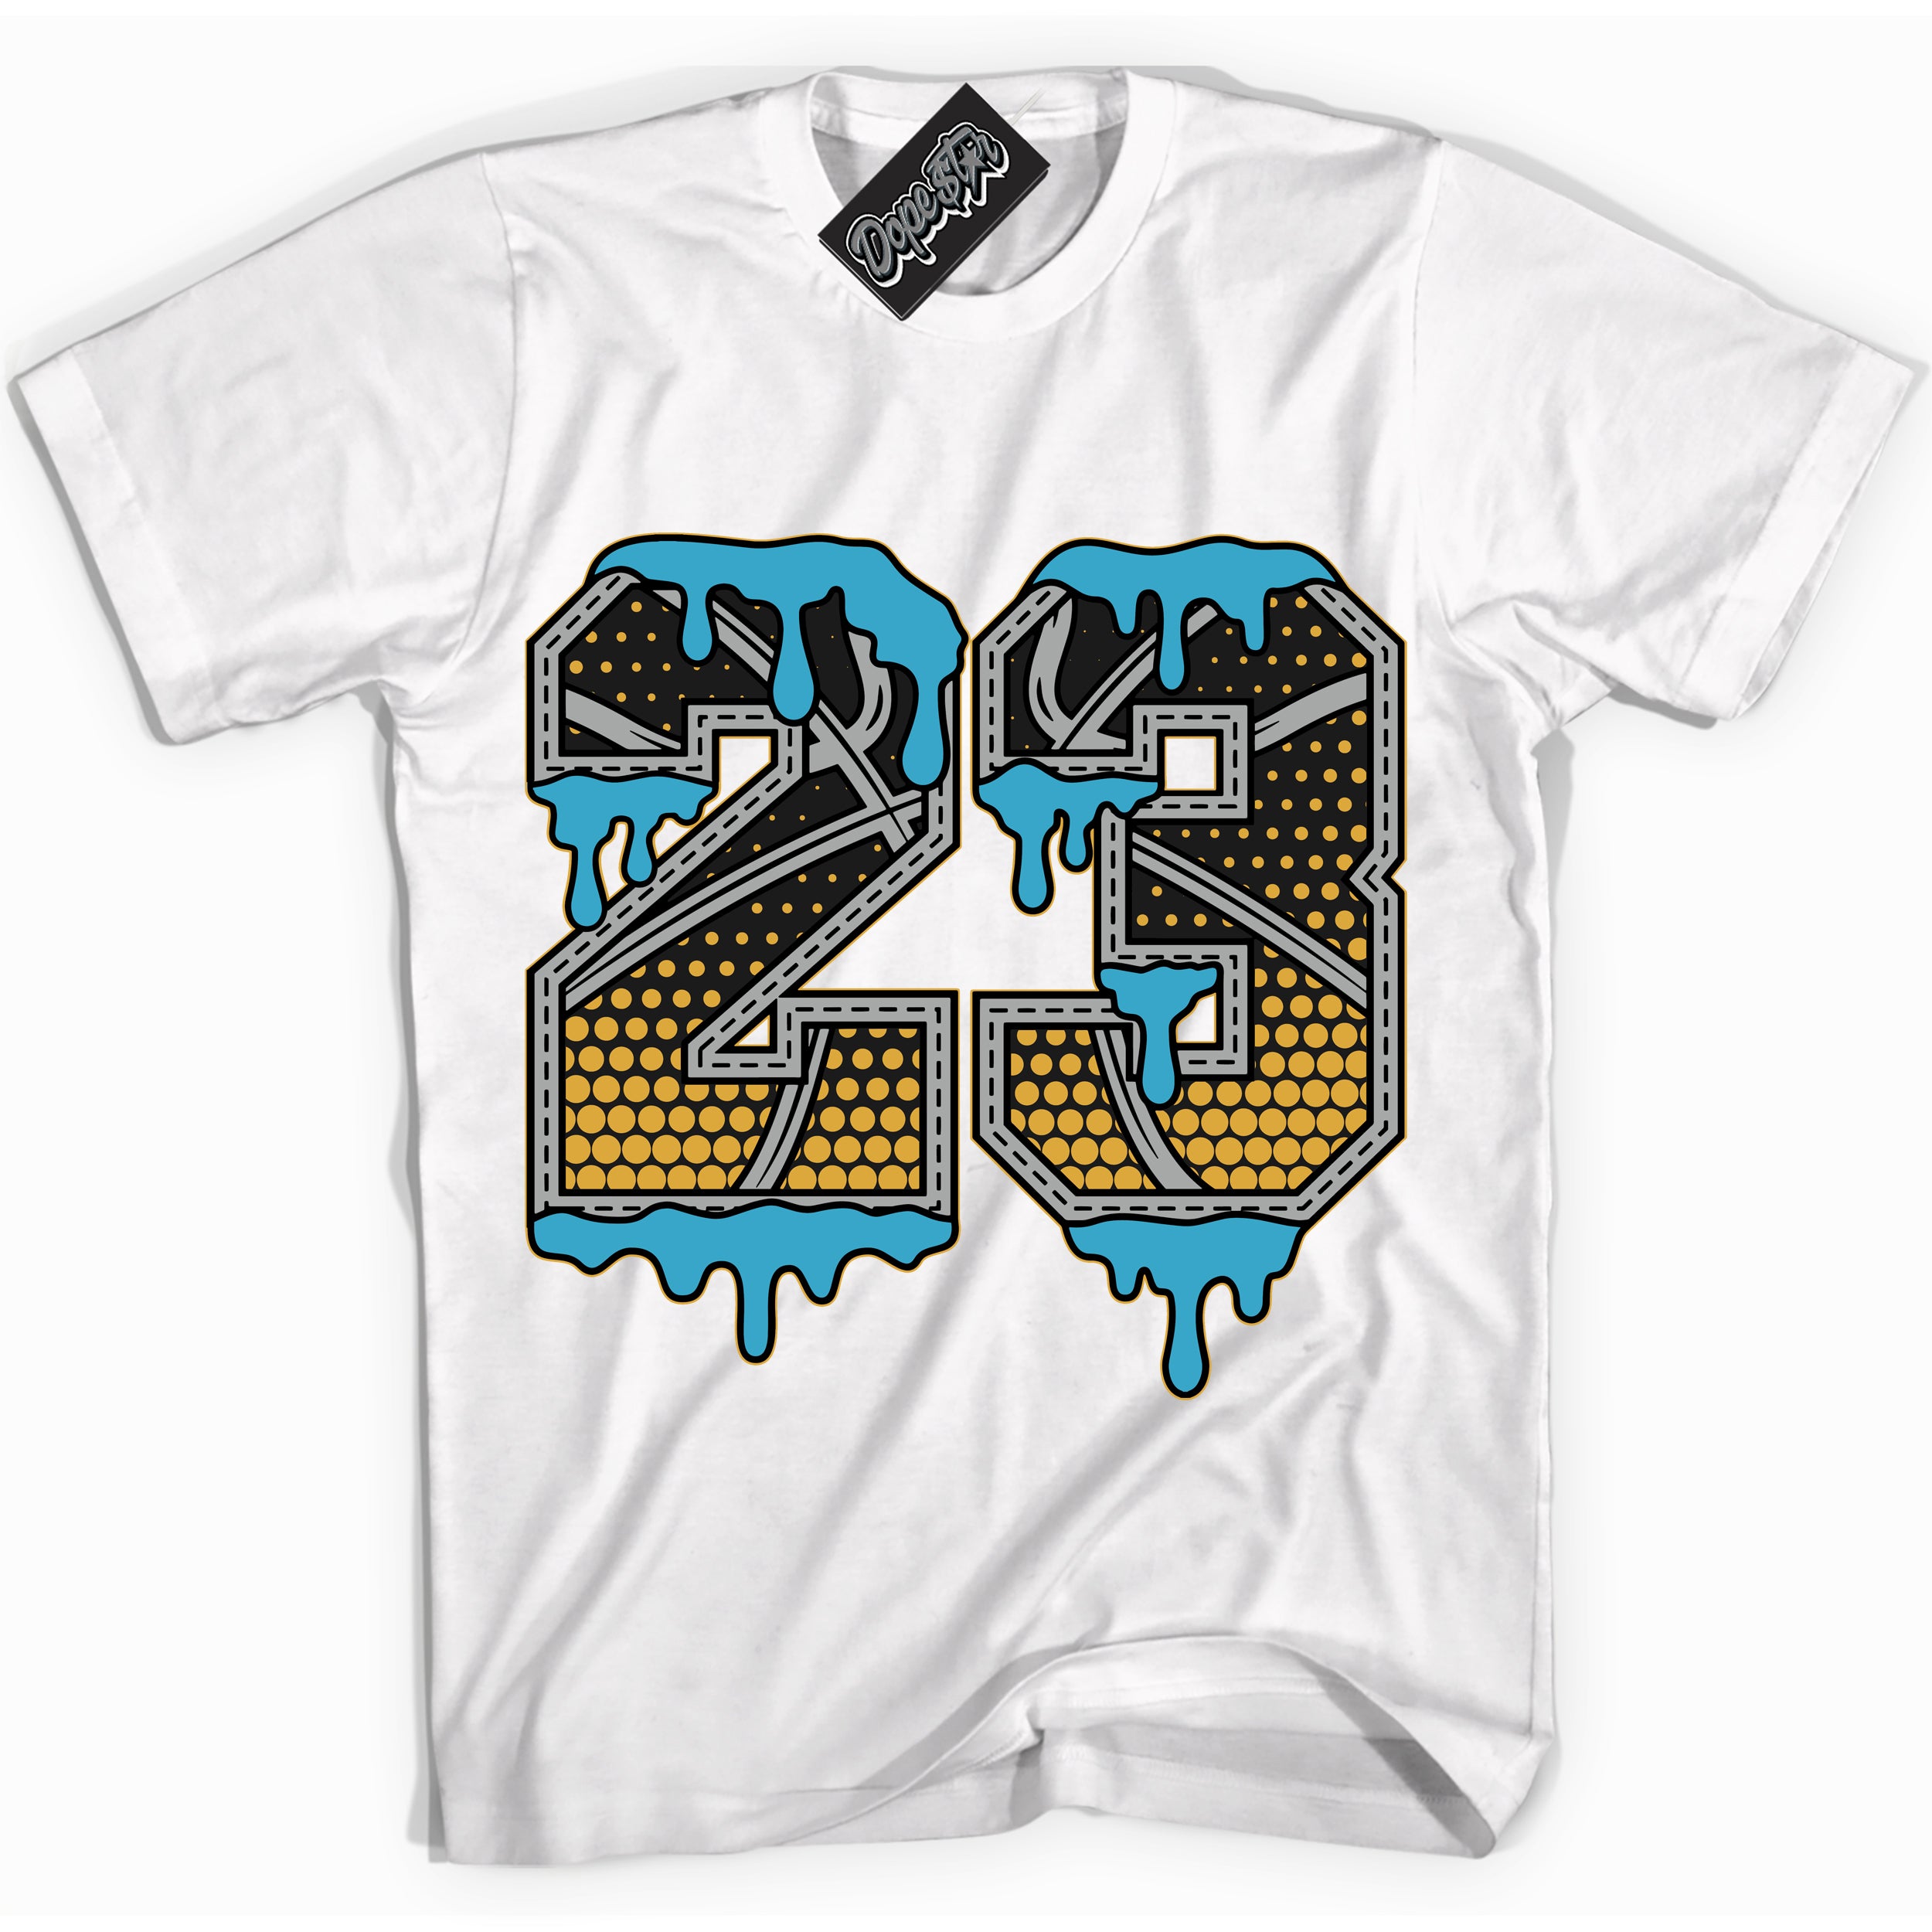 Cool White Shirt with “ 23 Ball” design that perfectly matches Aqua 5s Sneakers.